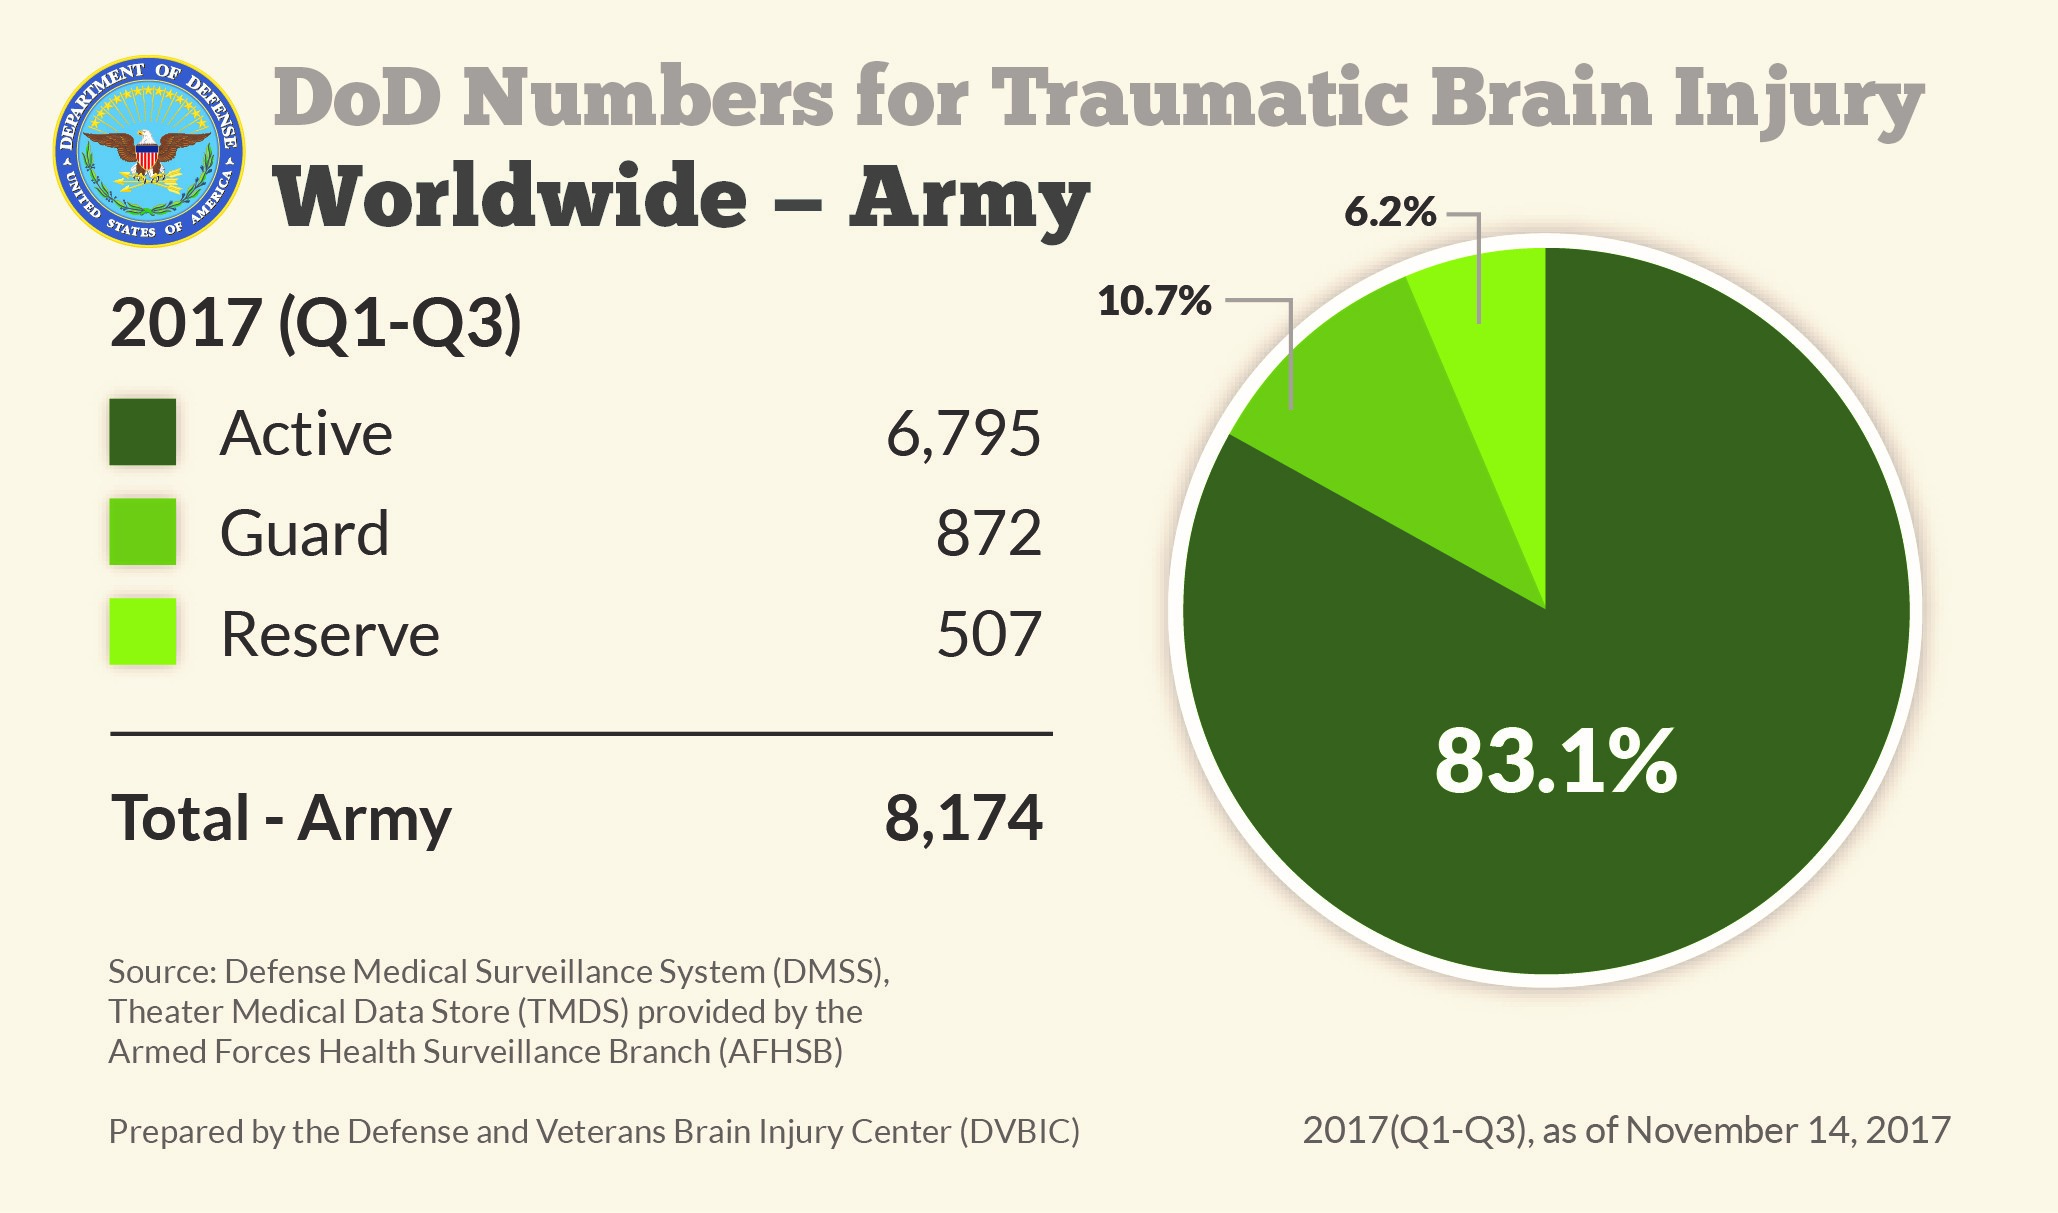 DoD Numbers for Traumatic Brain Injury Worldwide - Totals